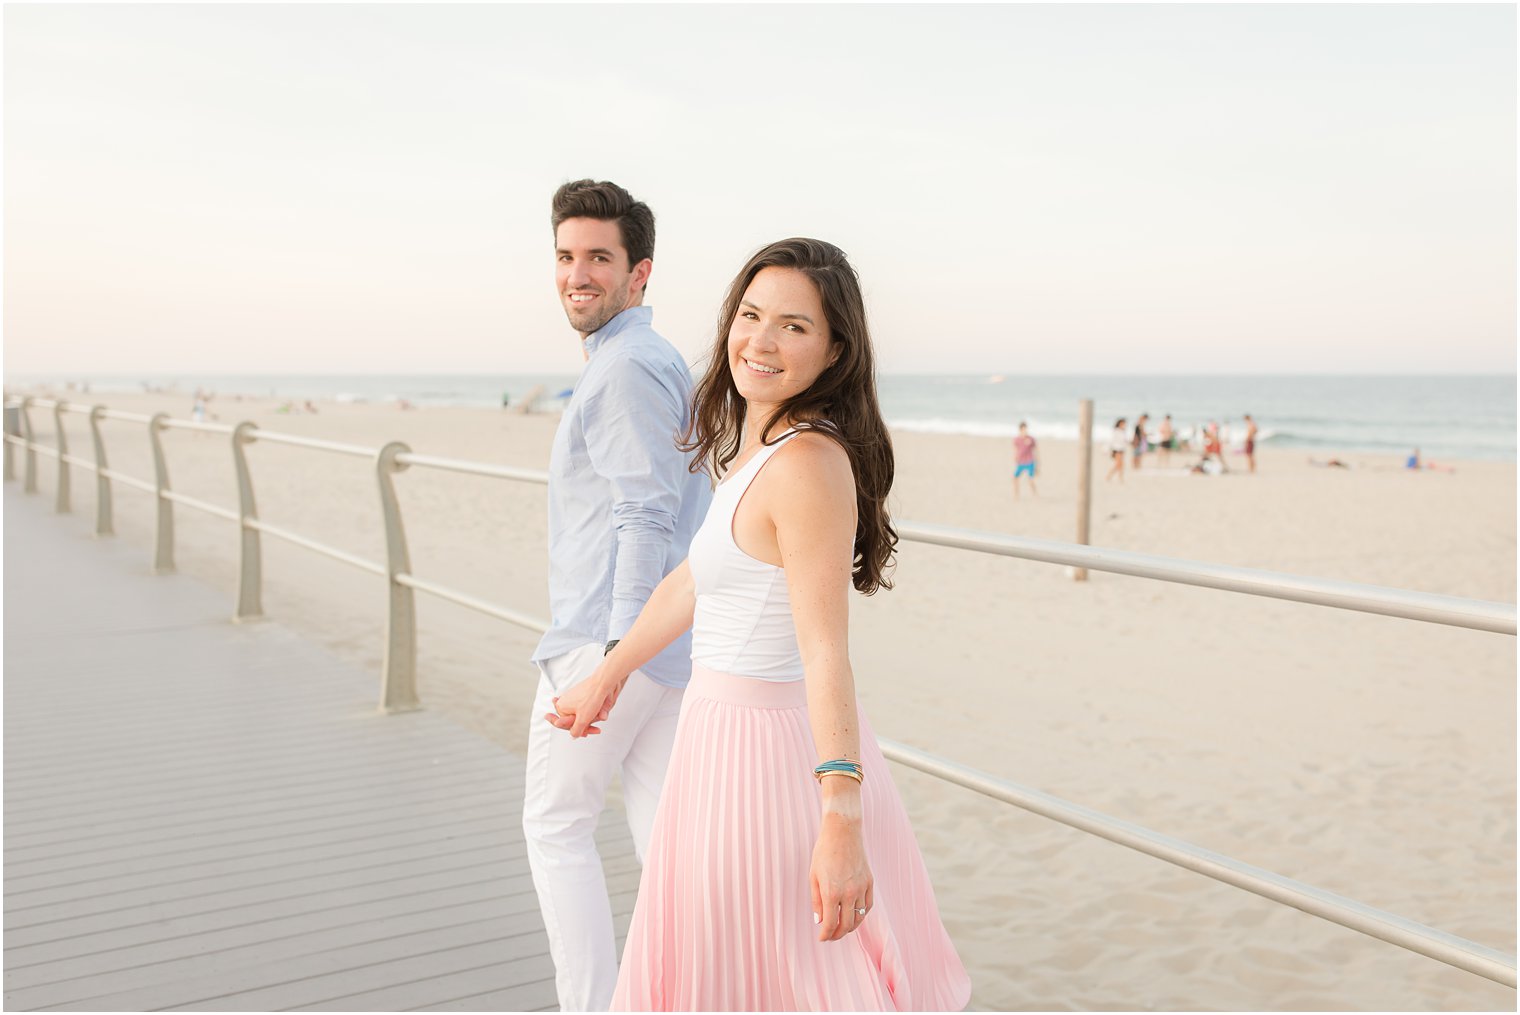 Spring Lake NJ Engagement Session with pastel outfits on boardwalk